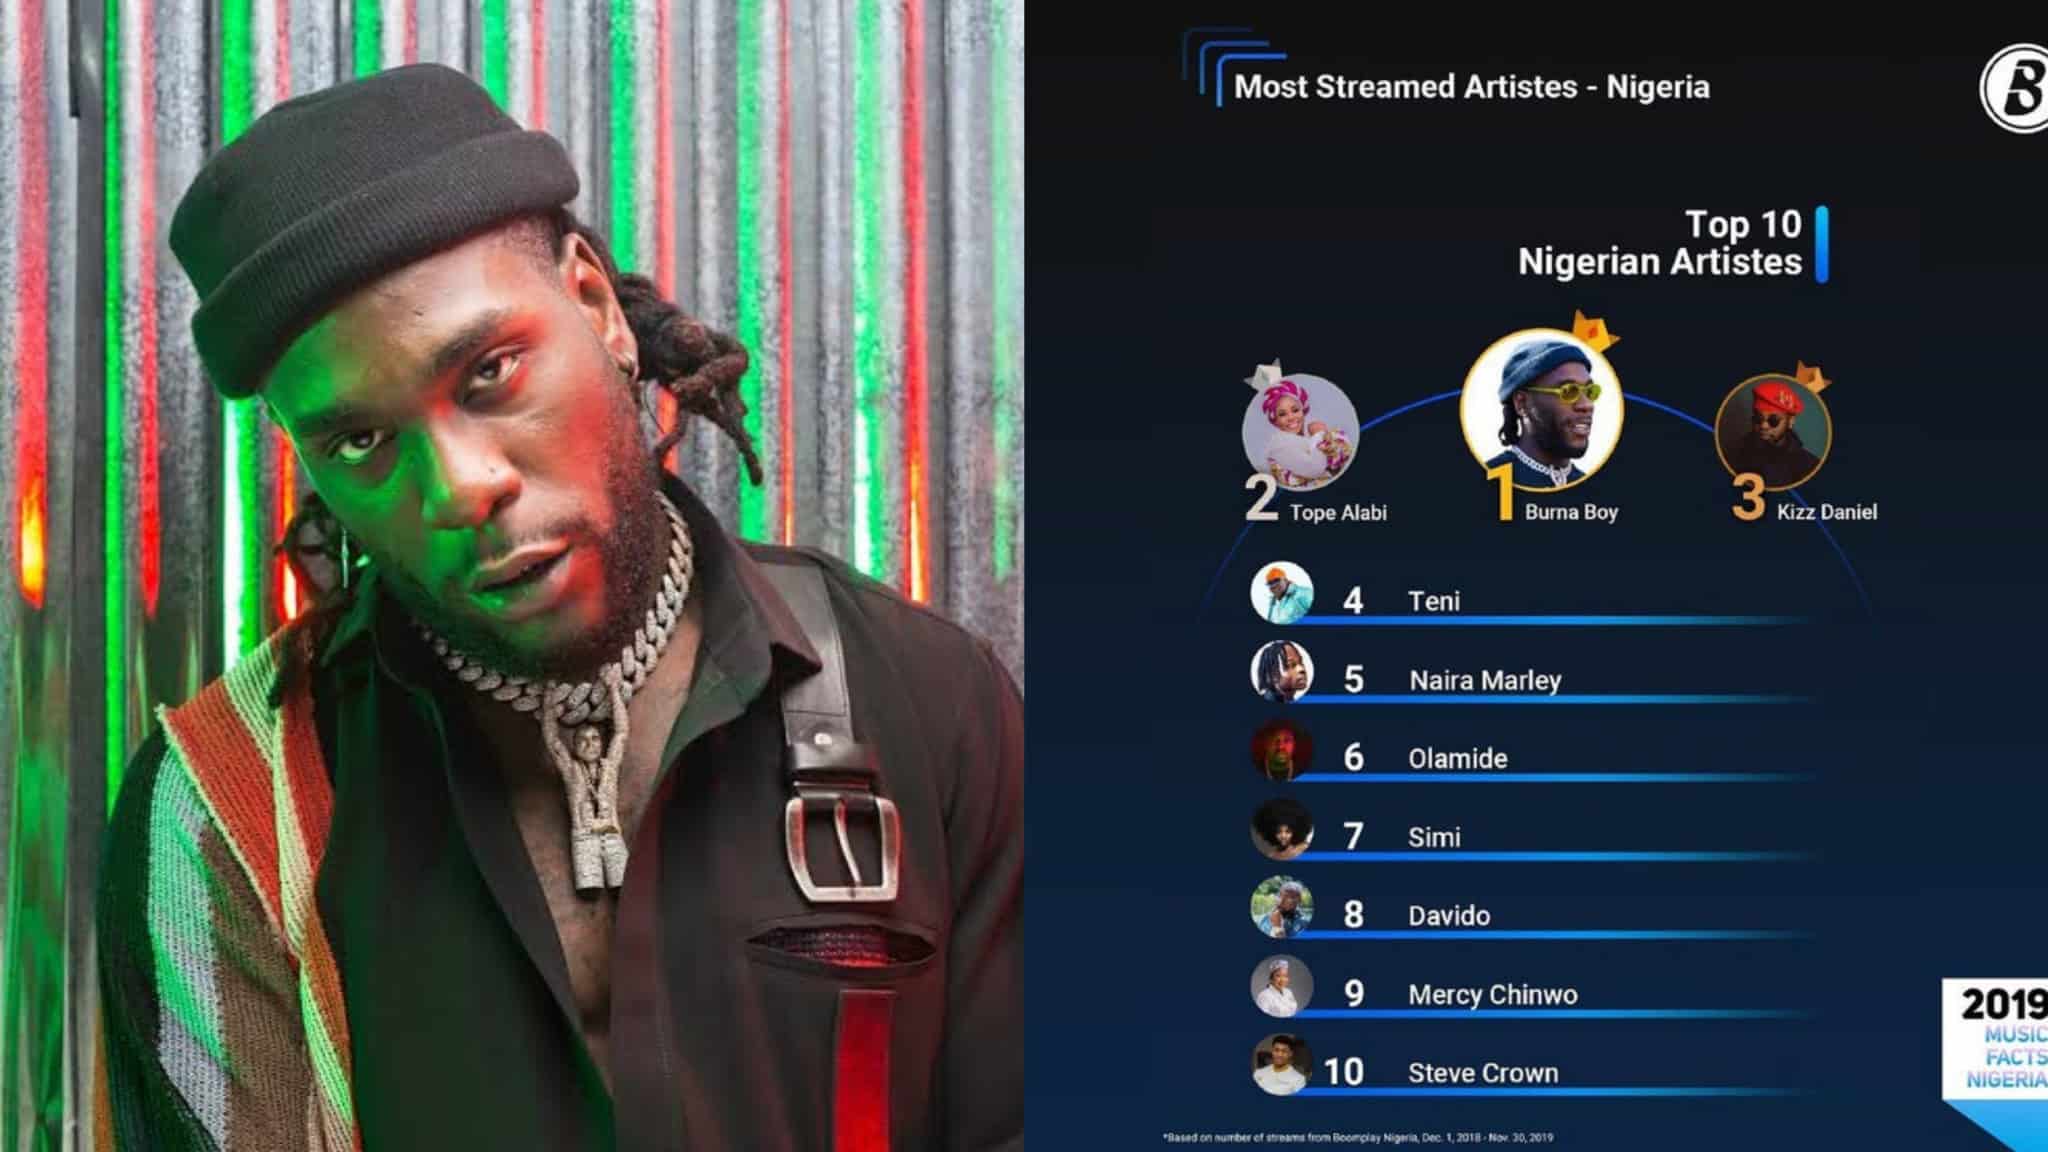 Burna Boy is the 'Most Streamed Nigerian Artist' on Boomplay